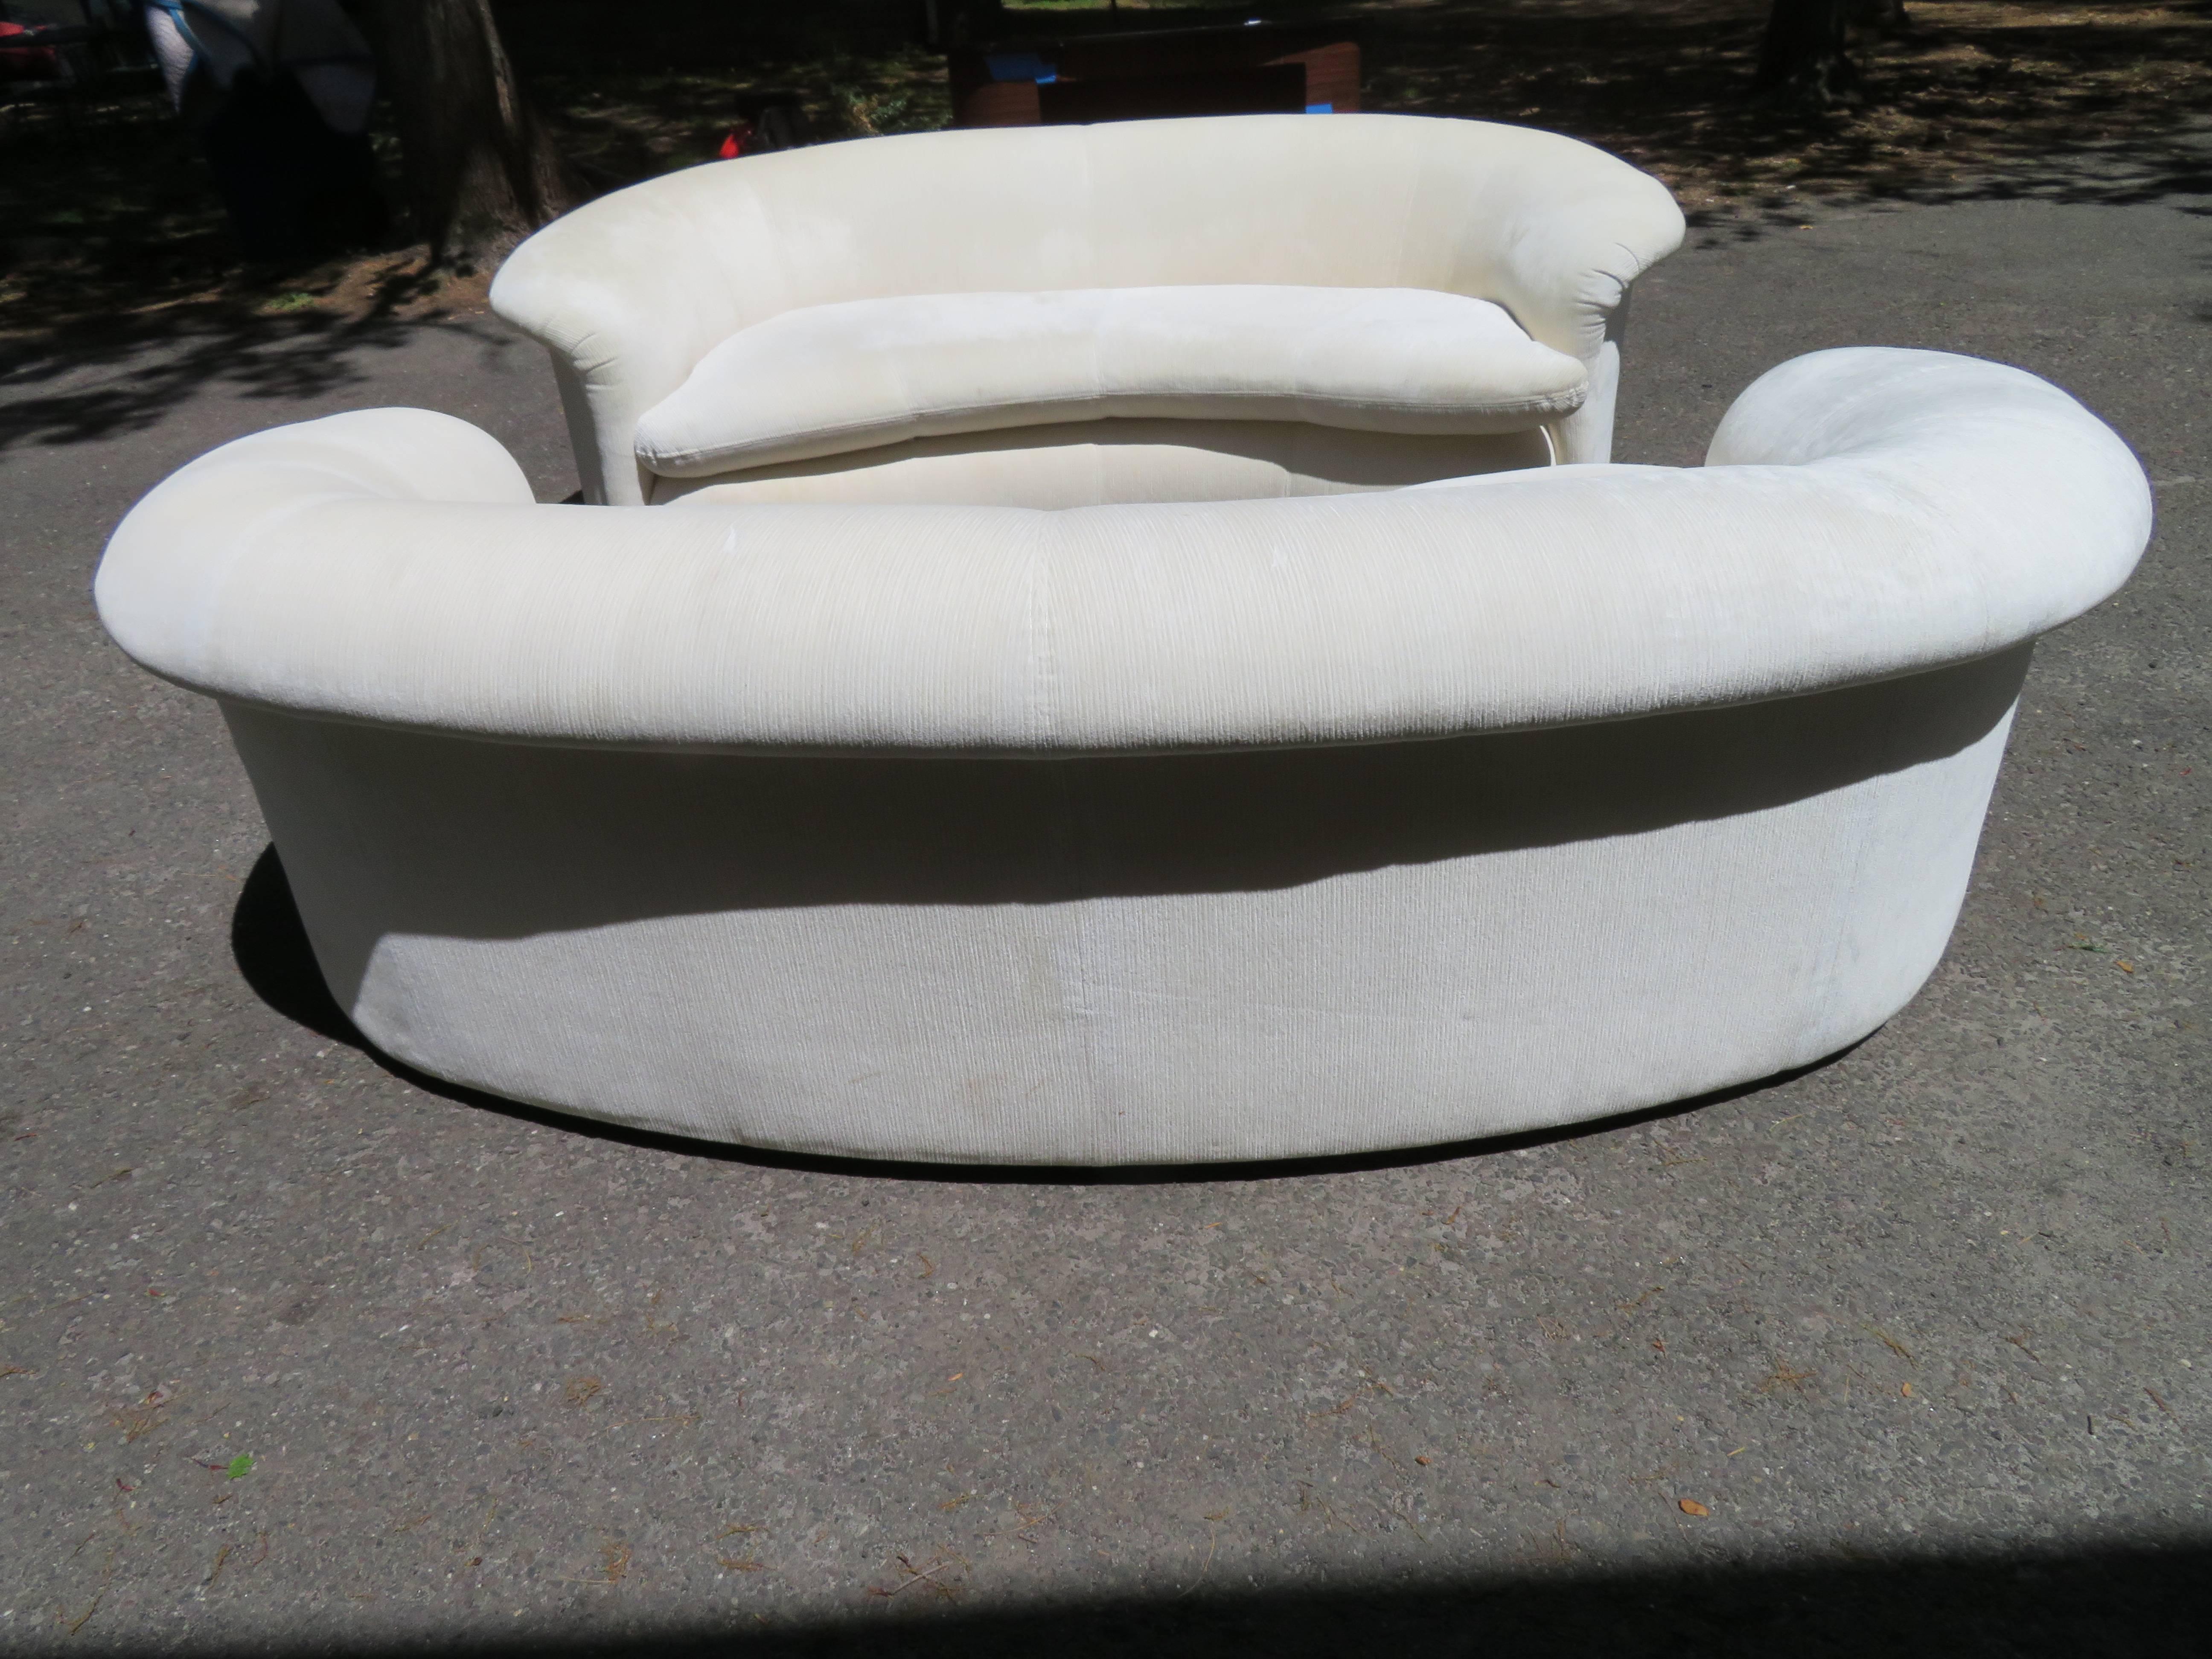 Lovely Pair of Kidney Shaped Curved Sofa Mid-Century Modern In Good Condition For Sale In Pemberton, NJ